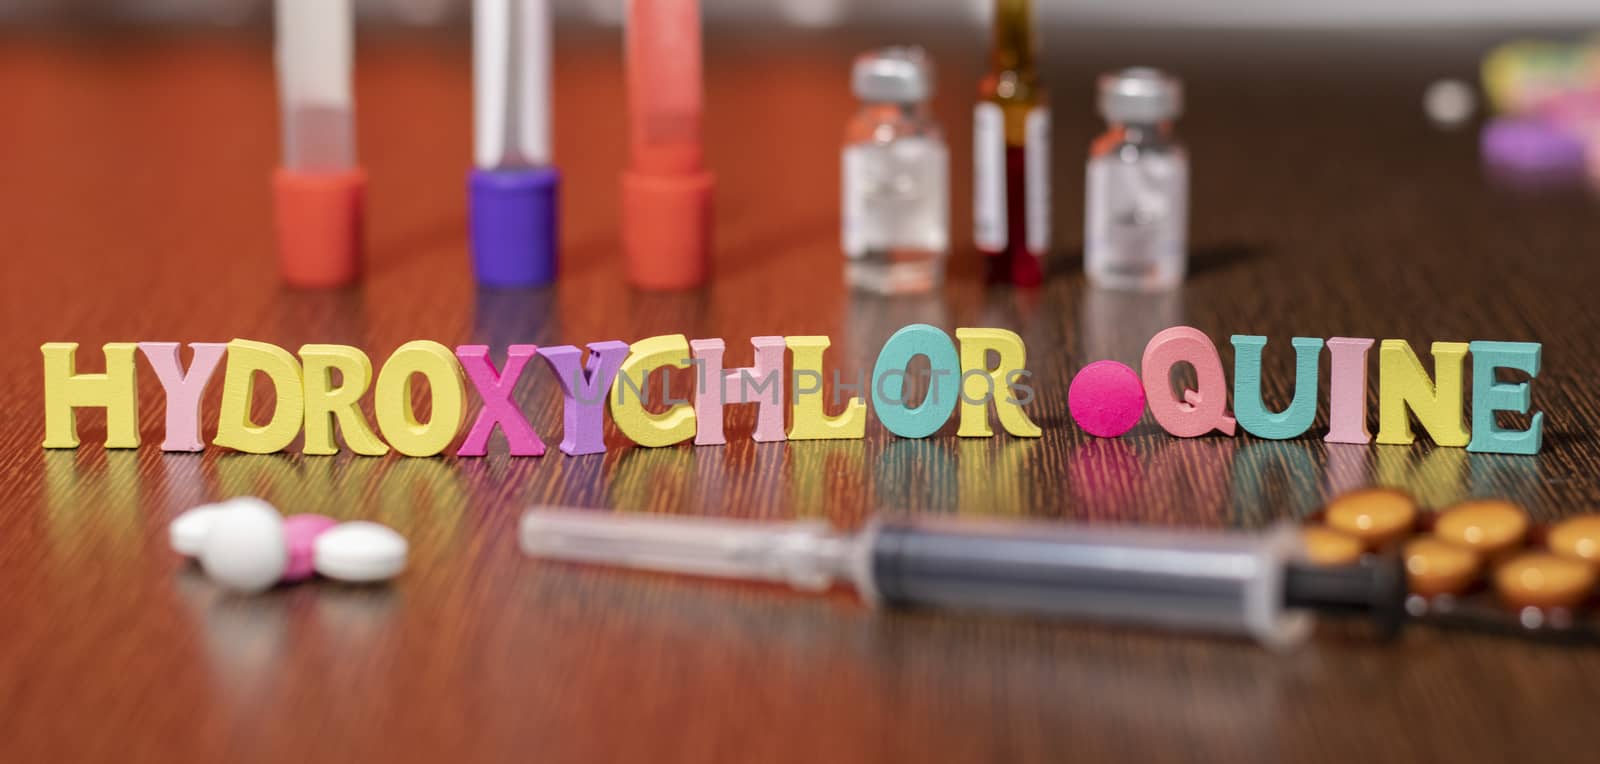 hydroxychloroquine or HCQ drug in colourful letters on table used for malaria